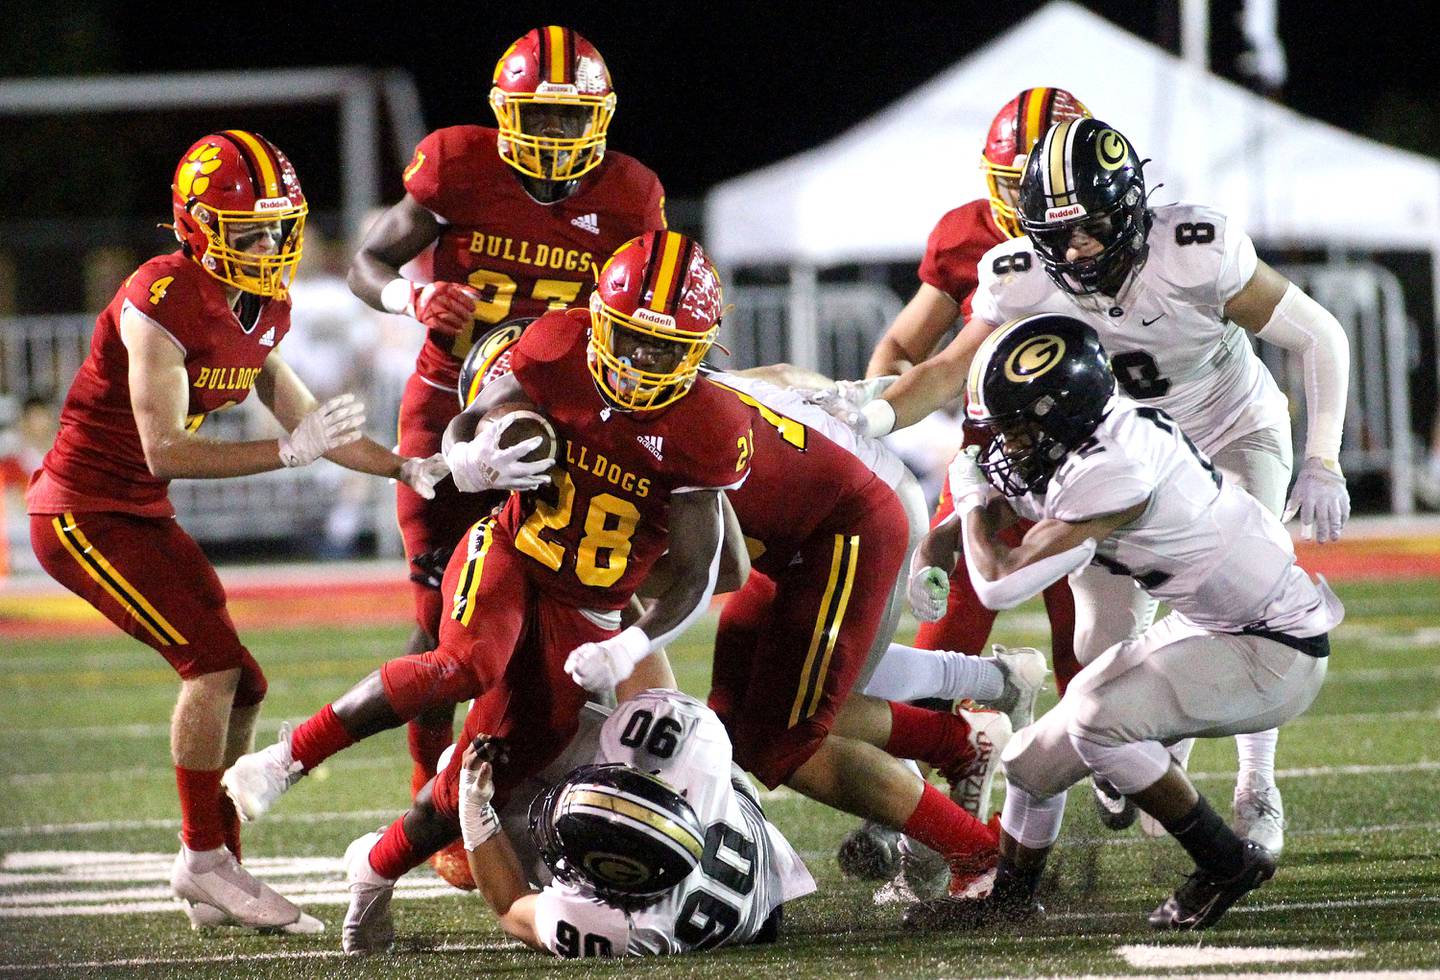 Batavia's AJ Sanders (28) carries the ball during a home game against Glenbard North on Friday, Sept. 24, 2021.